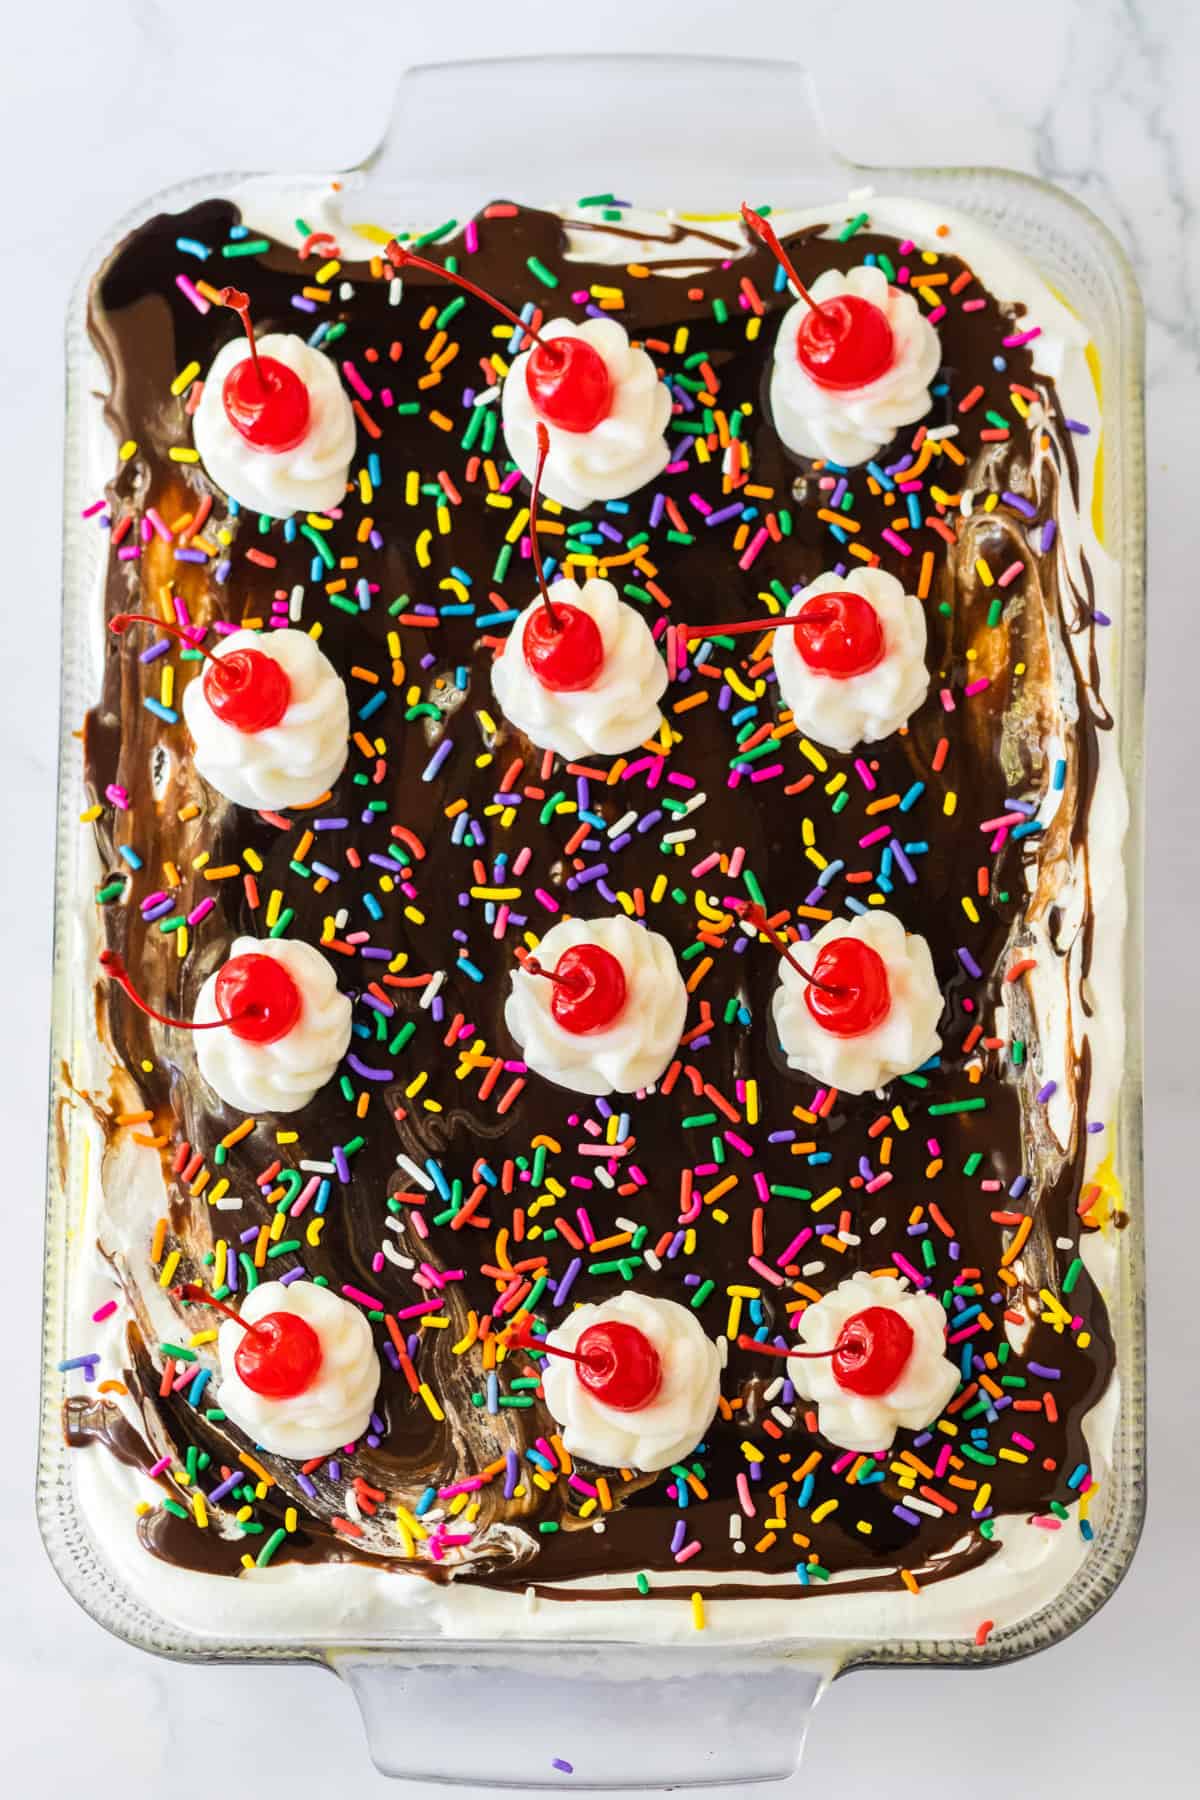 Dessert topped with chocolate syrup, rainbow sprinkles, and 12 dollops of whipped cream each topped with maraschino cherries.